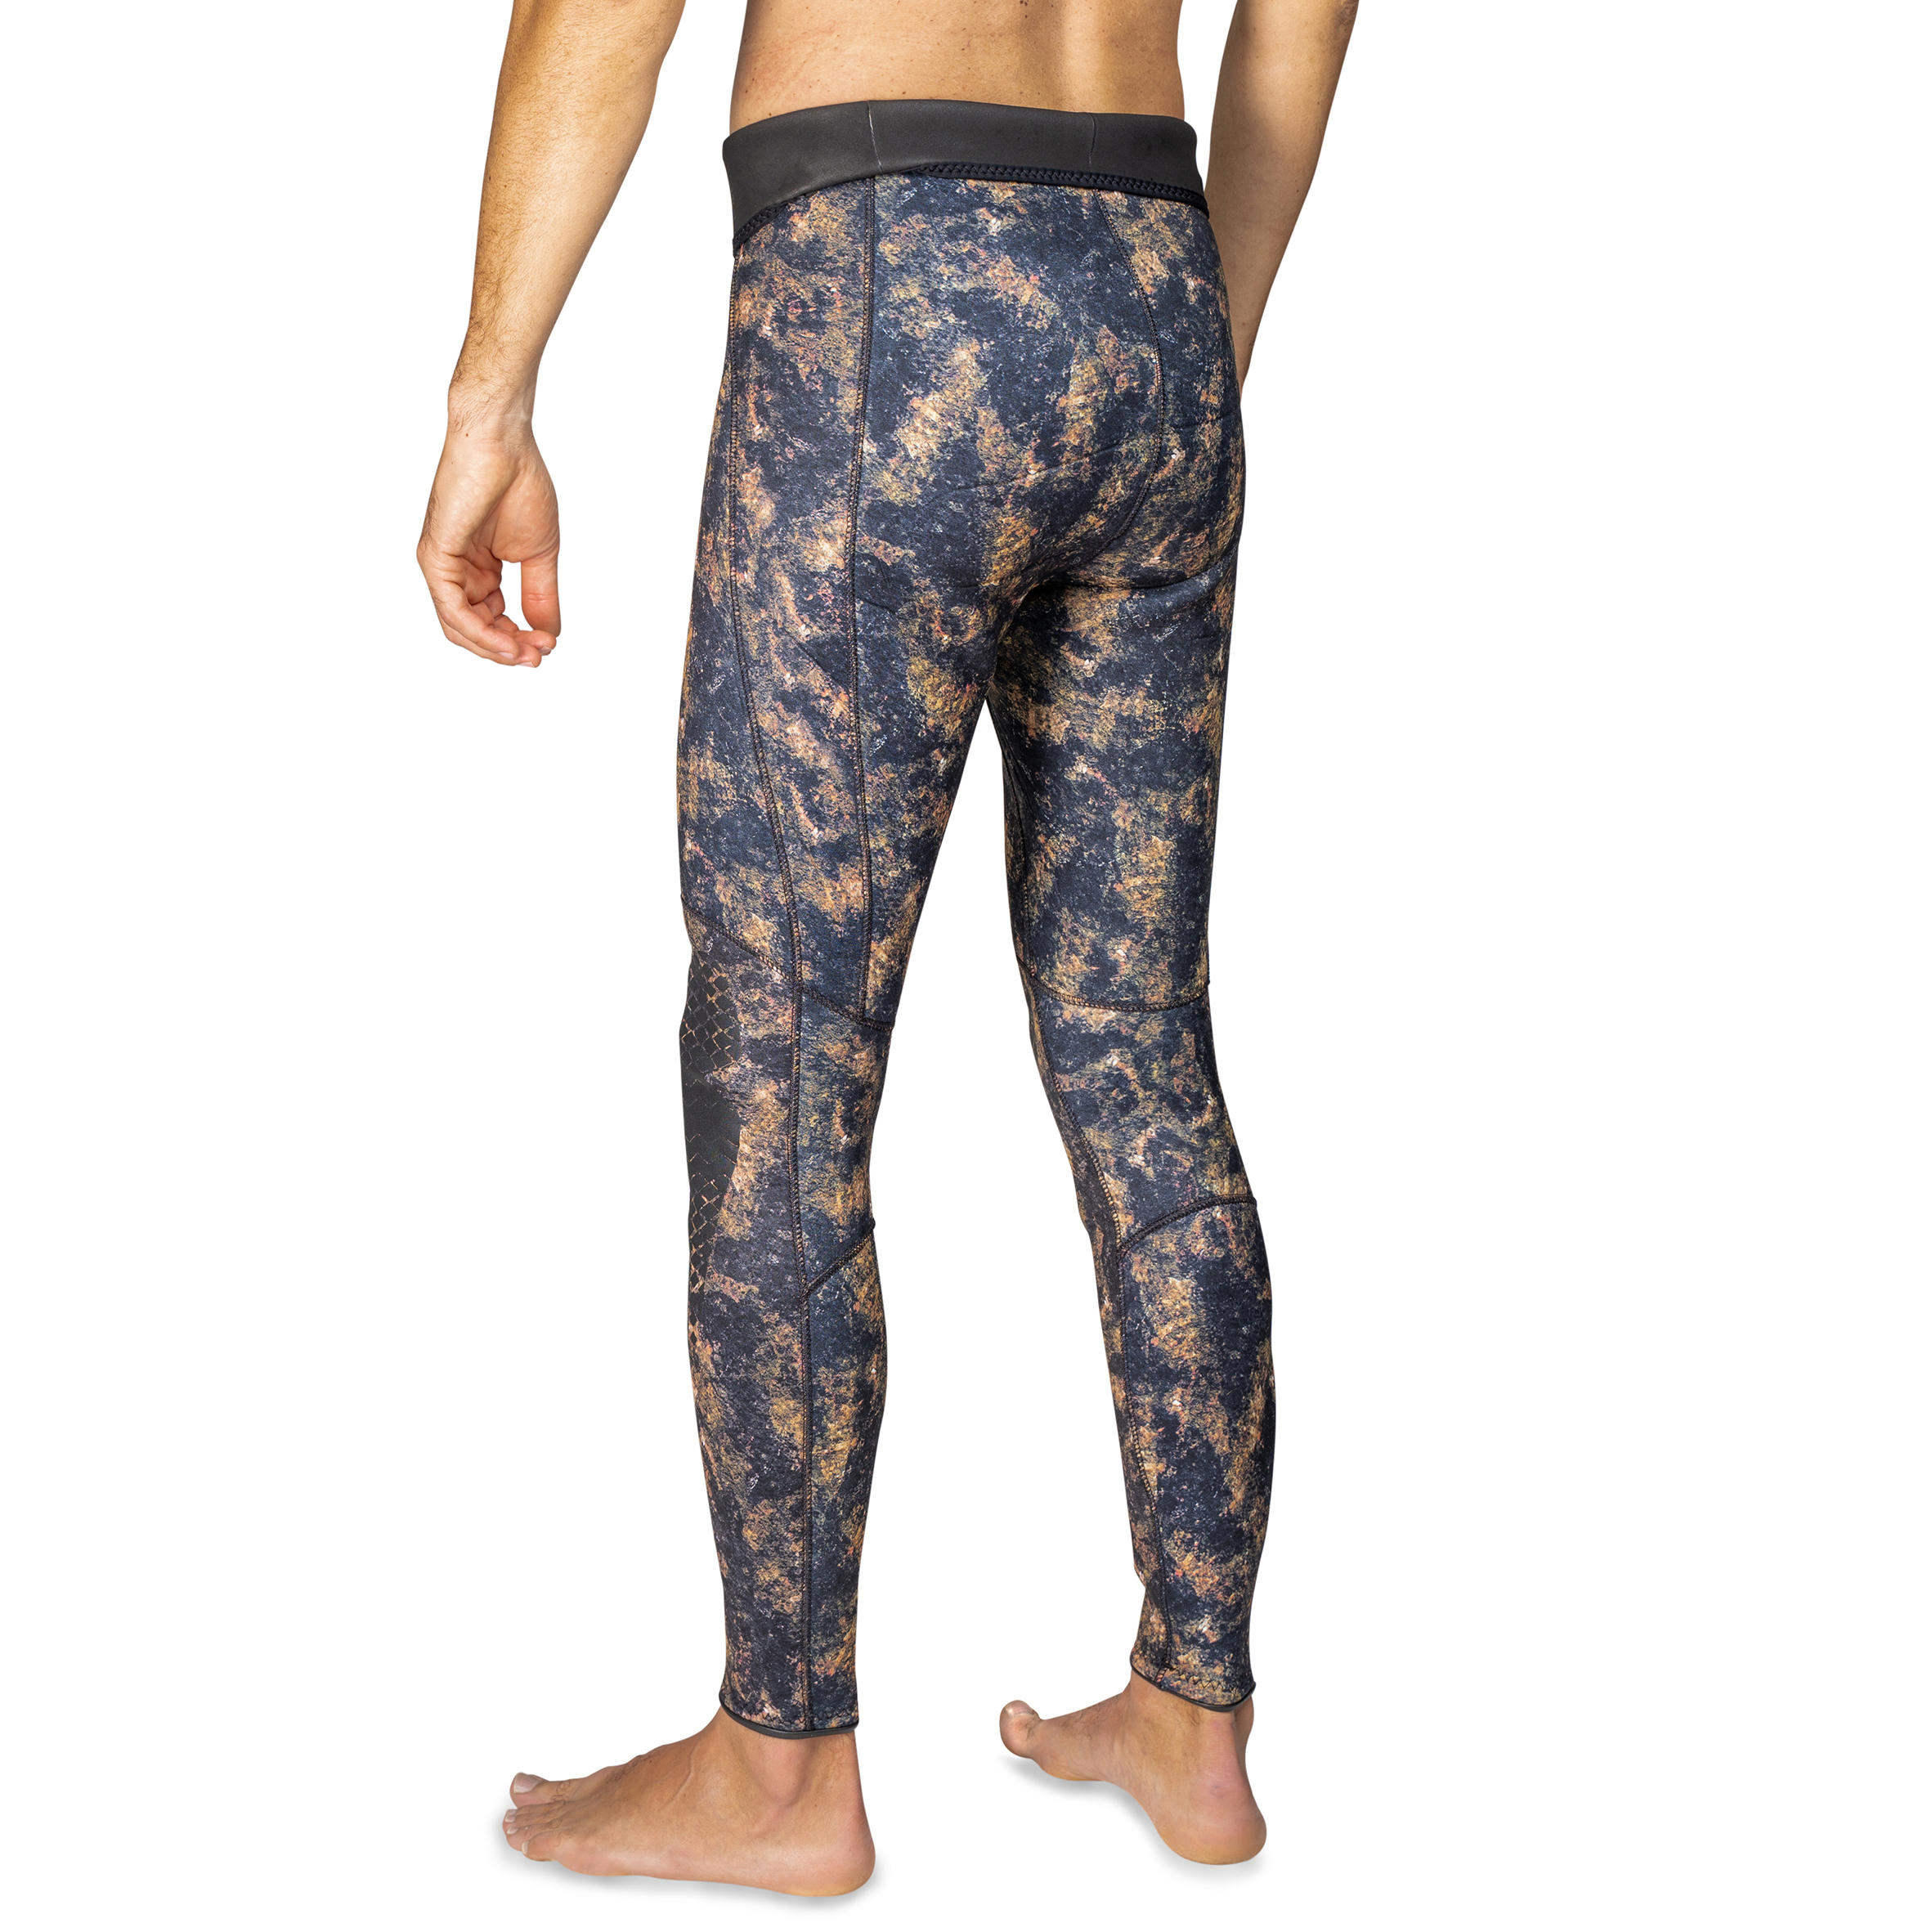 3mm split neoprene camouflage trousers for free-diving spearfishing 5/6